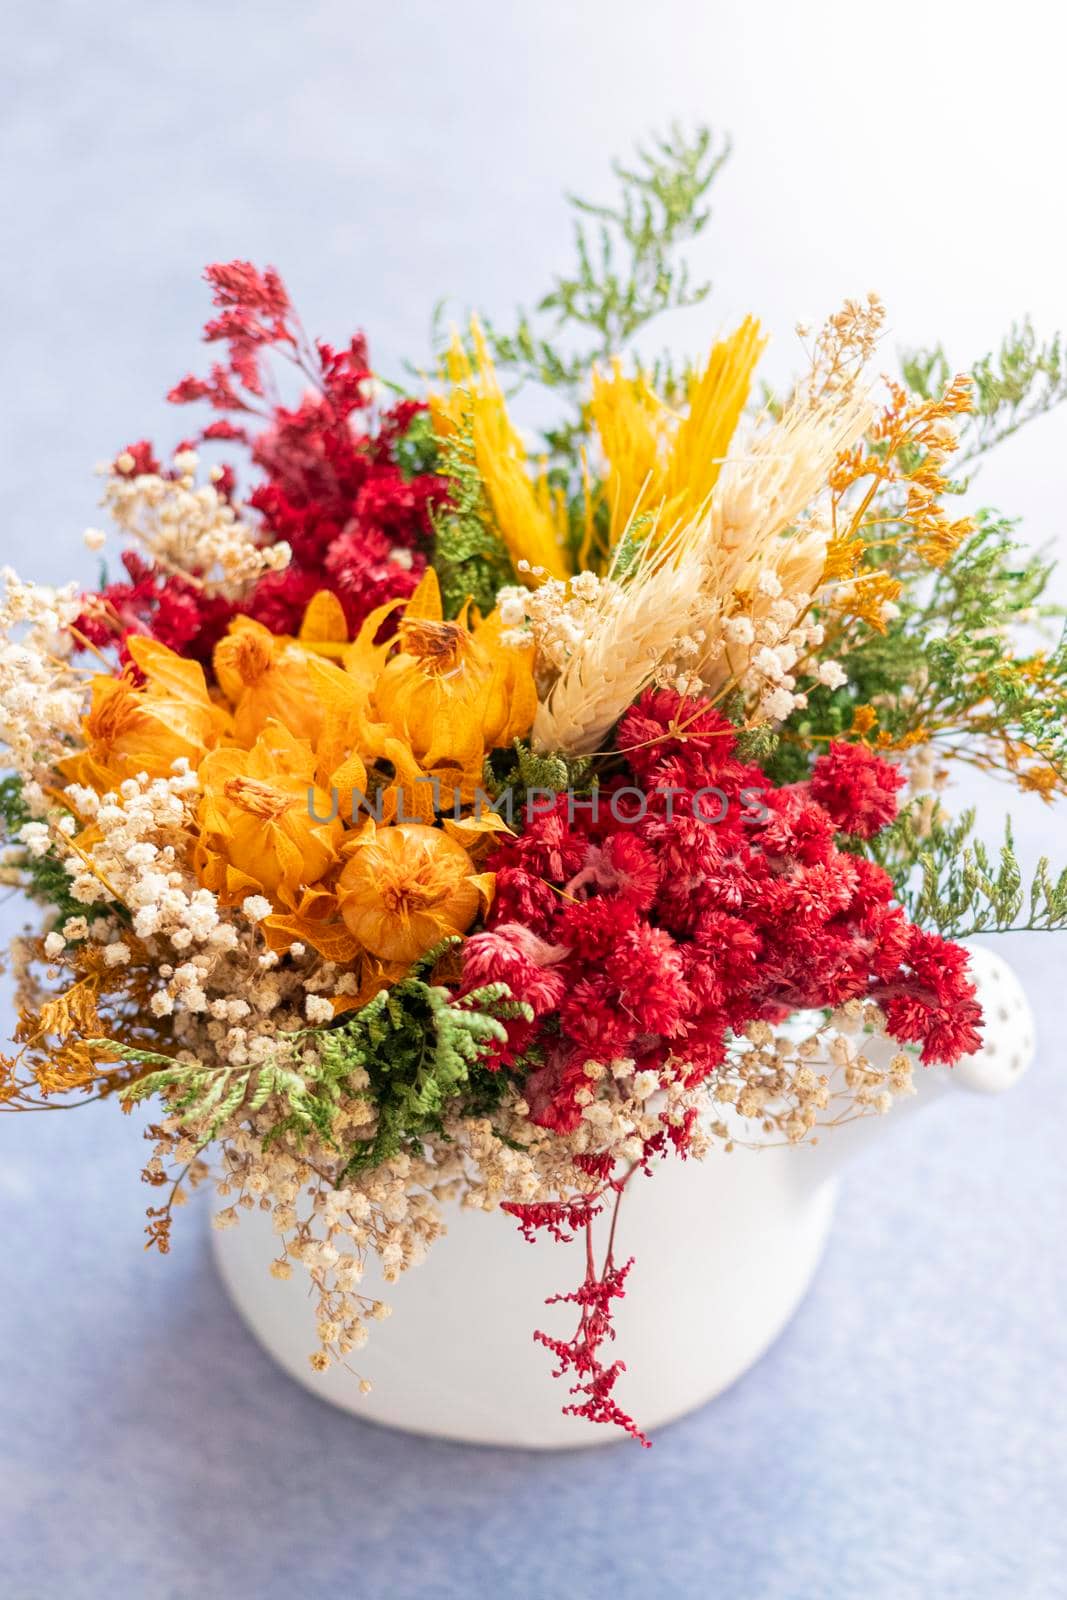 Bouquet of colorful dried flowers by eagg13